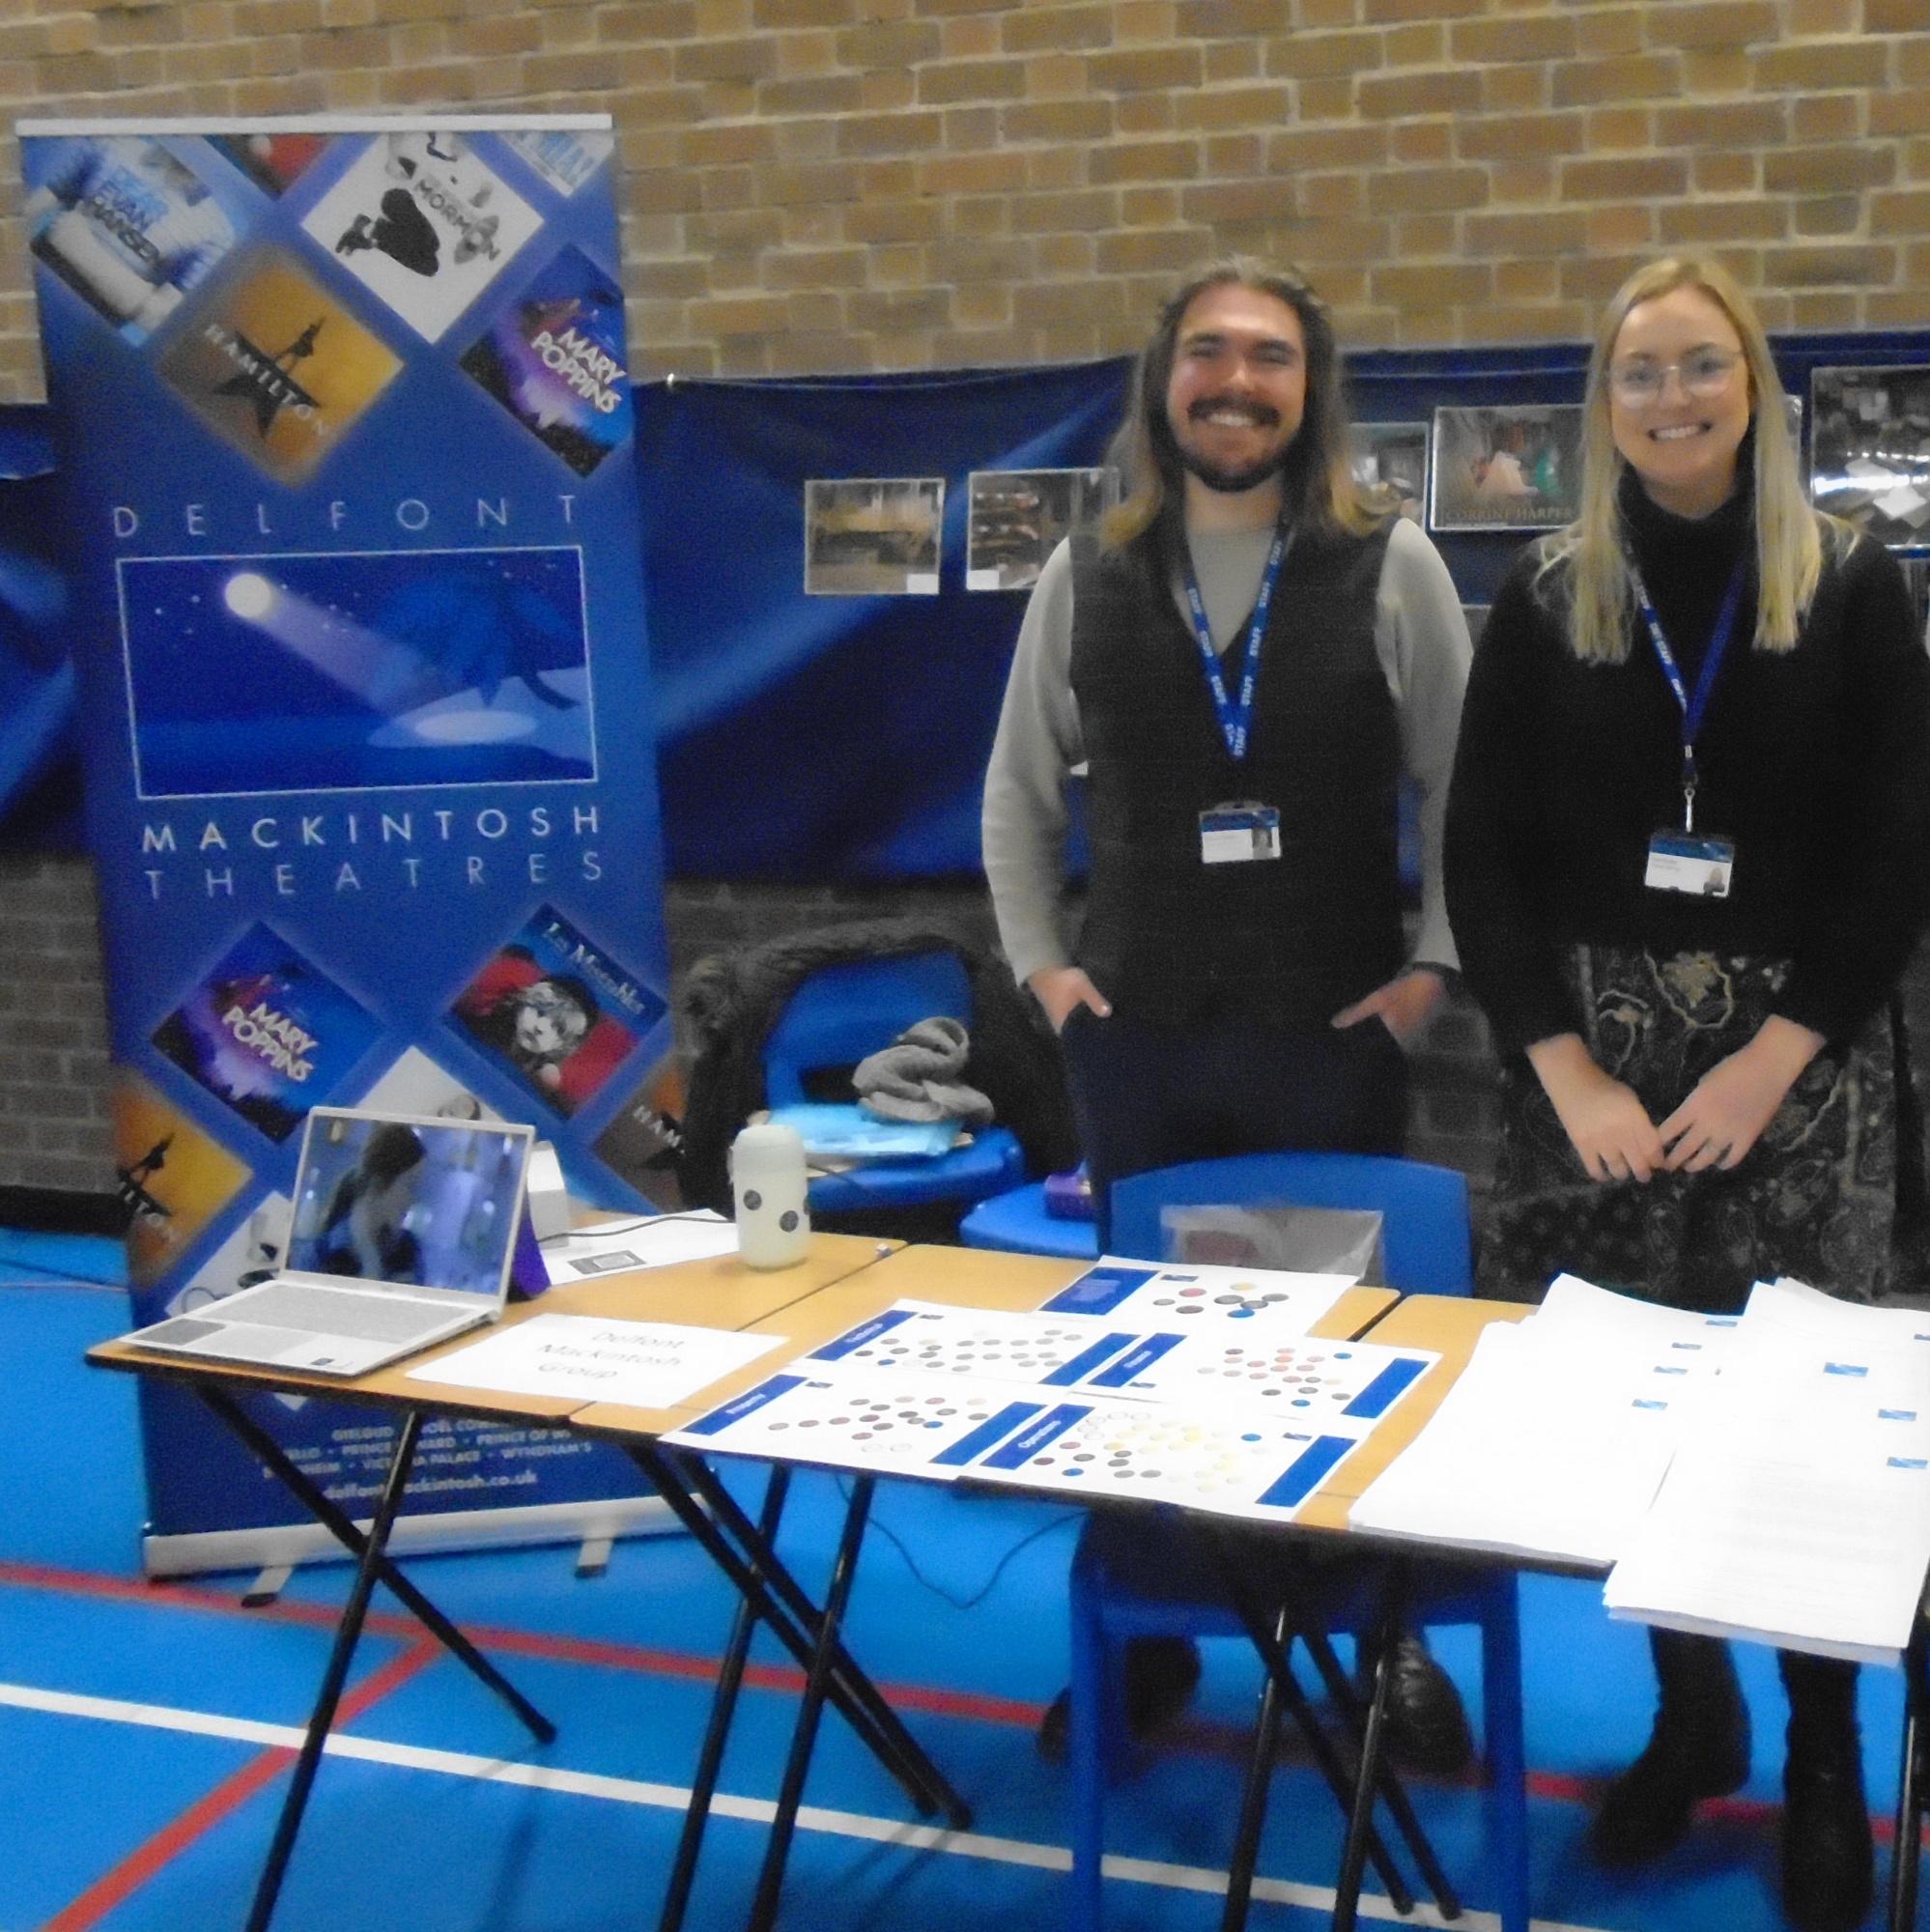 Delfont Mackintosh Group exhibiting at Futures First Careers Fair 